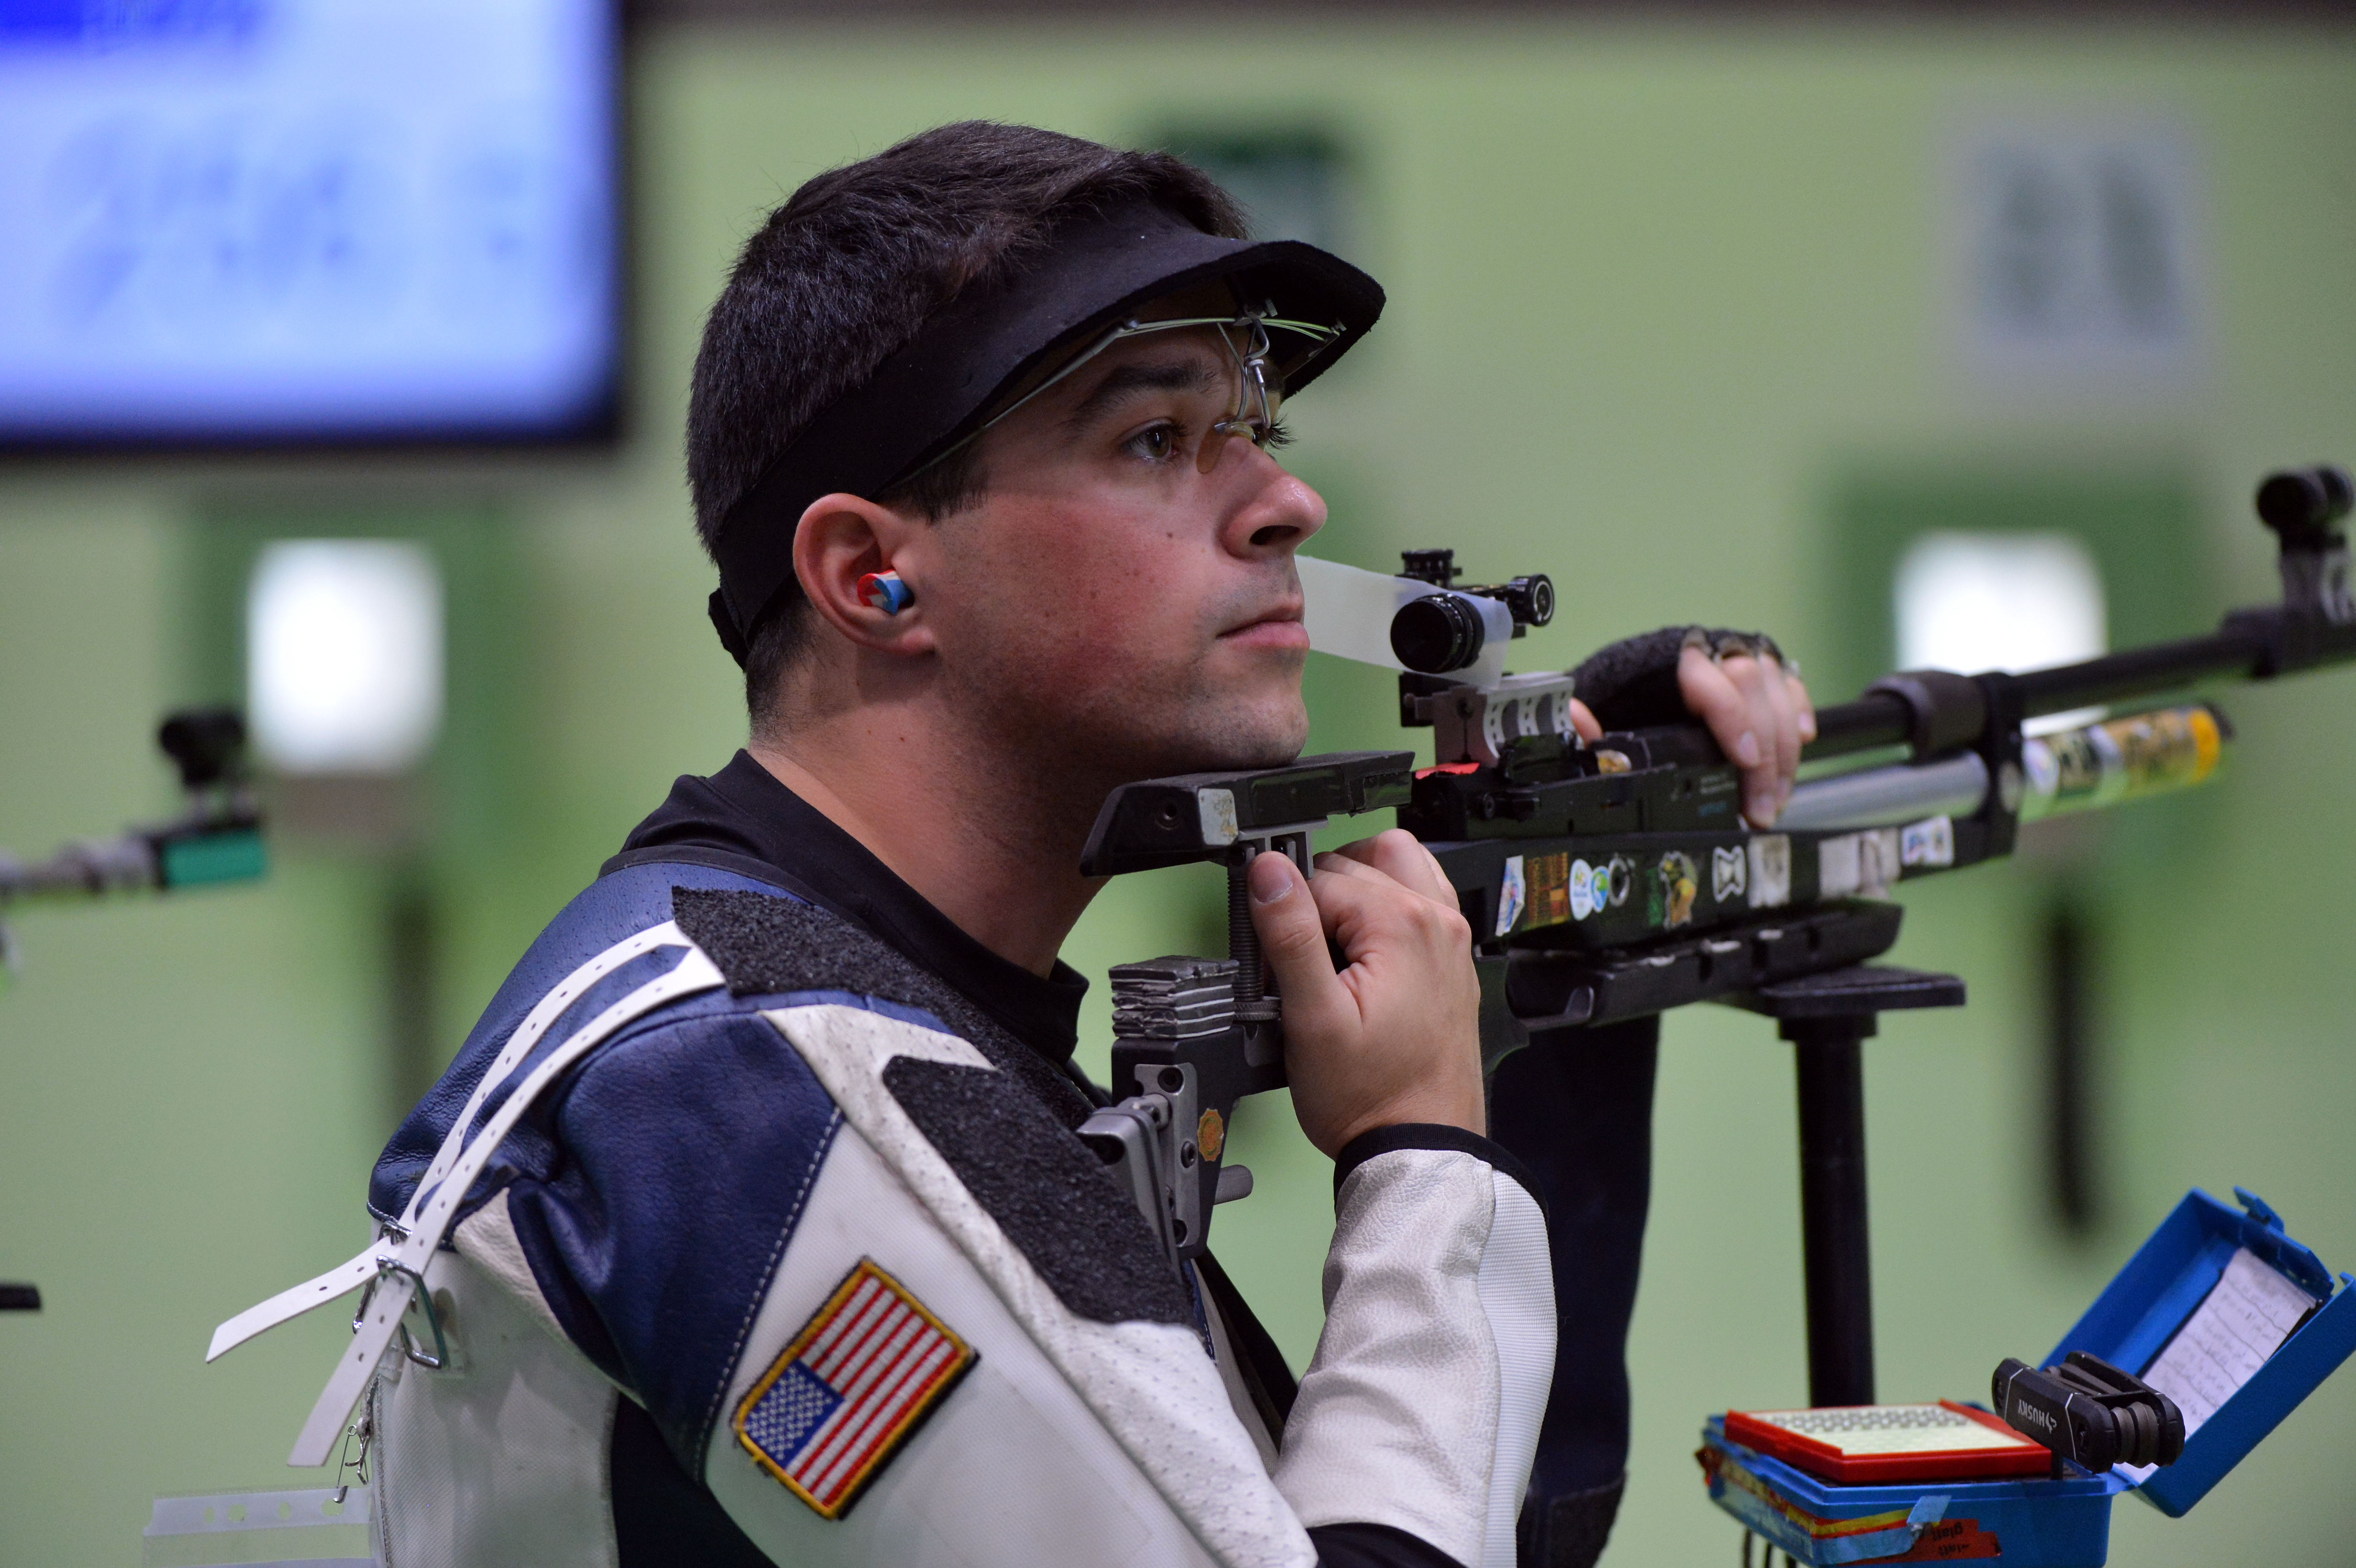 Daniel Lowe at the Rio Olympic Games 10-meter air rifle event